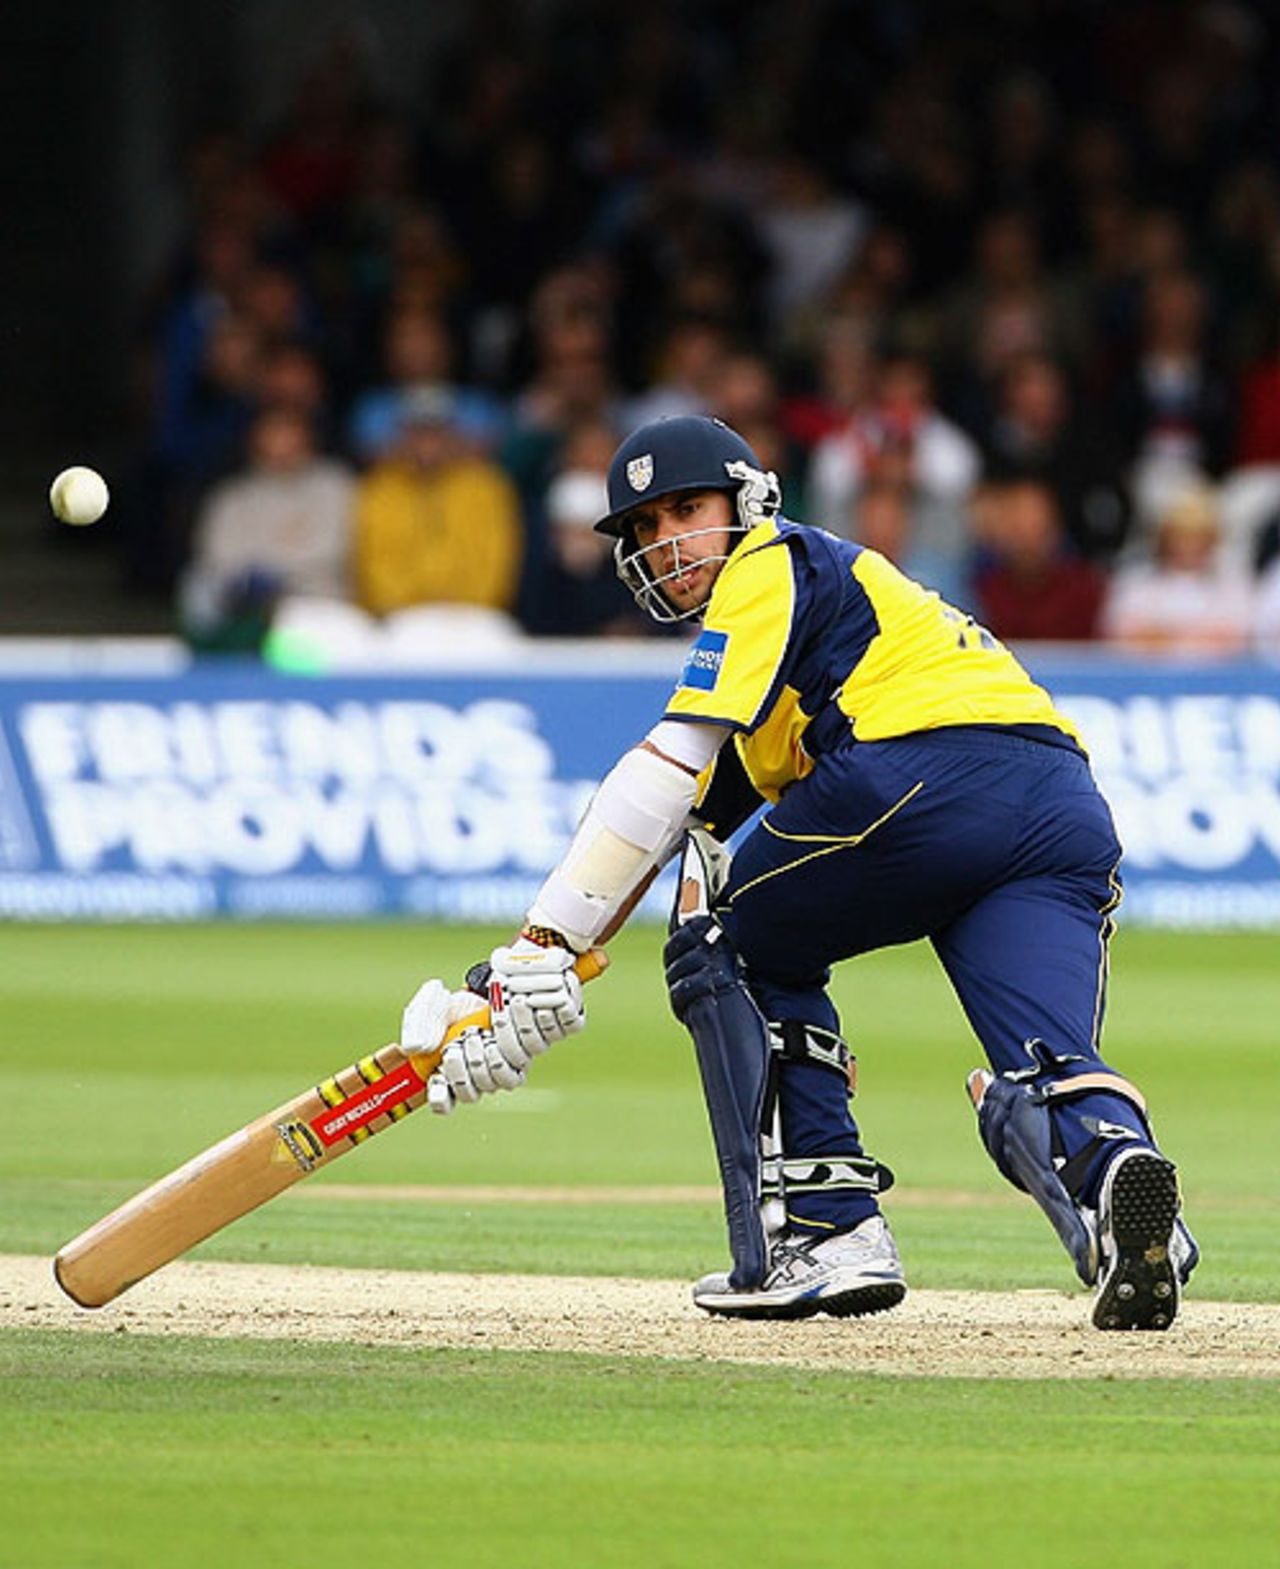 Kyle Coetzer scored 61 off 74 balls, Durham v Hampshire, Friends Provident Trophy final, Lord's, August 18, 2007